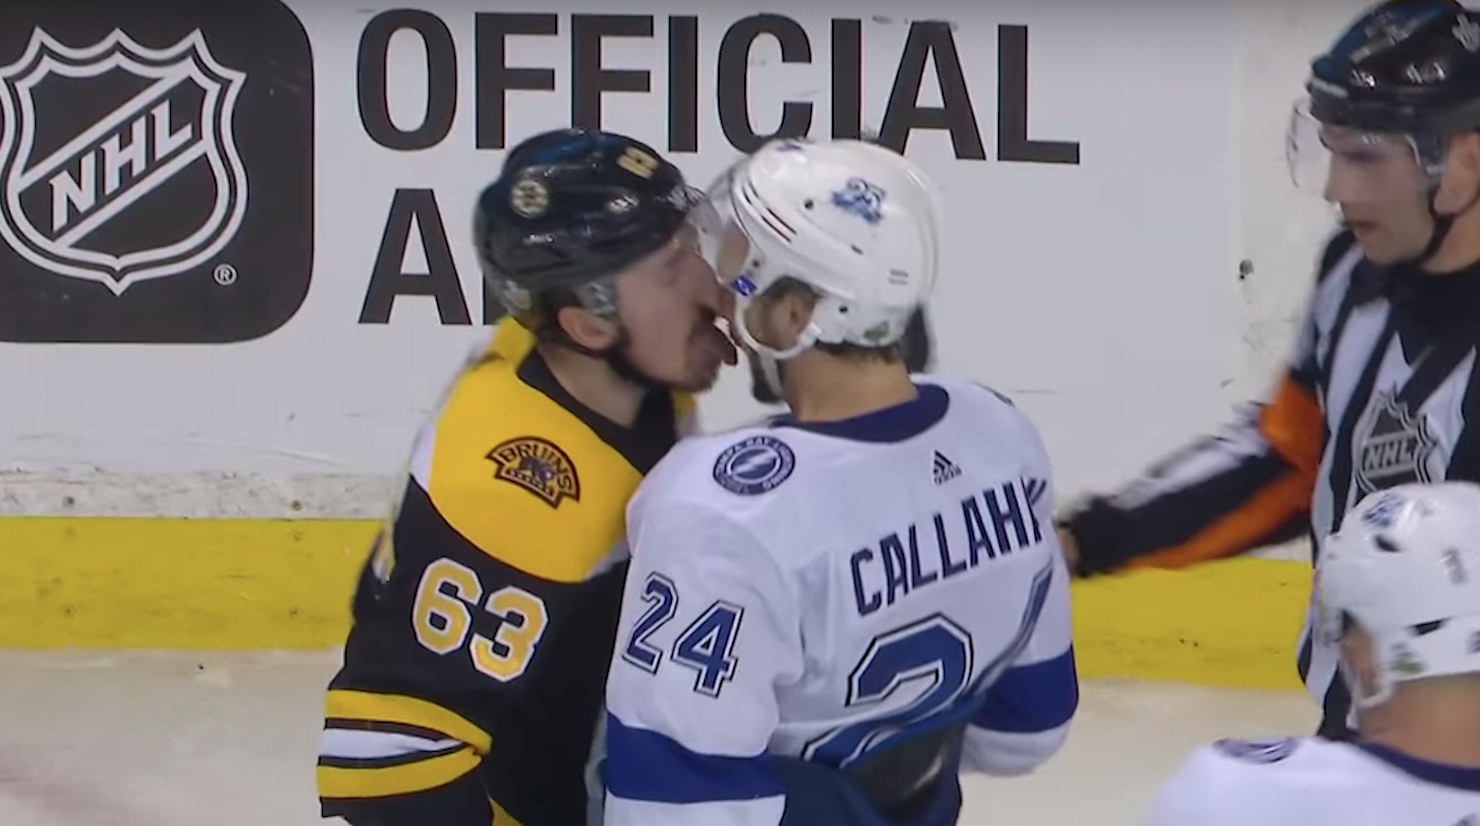 Brad Marchand Licking Everyone is the Height of NHL Stupidity